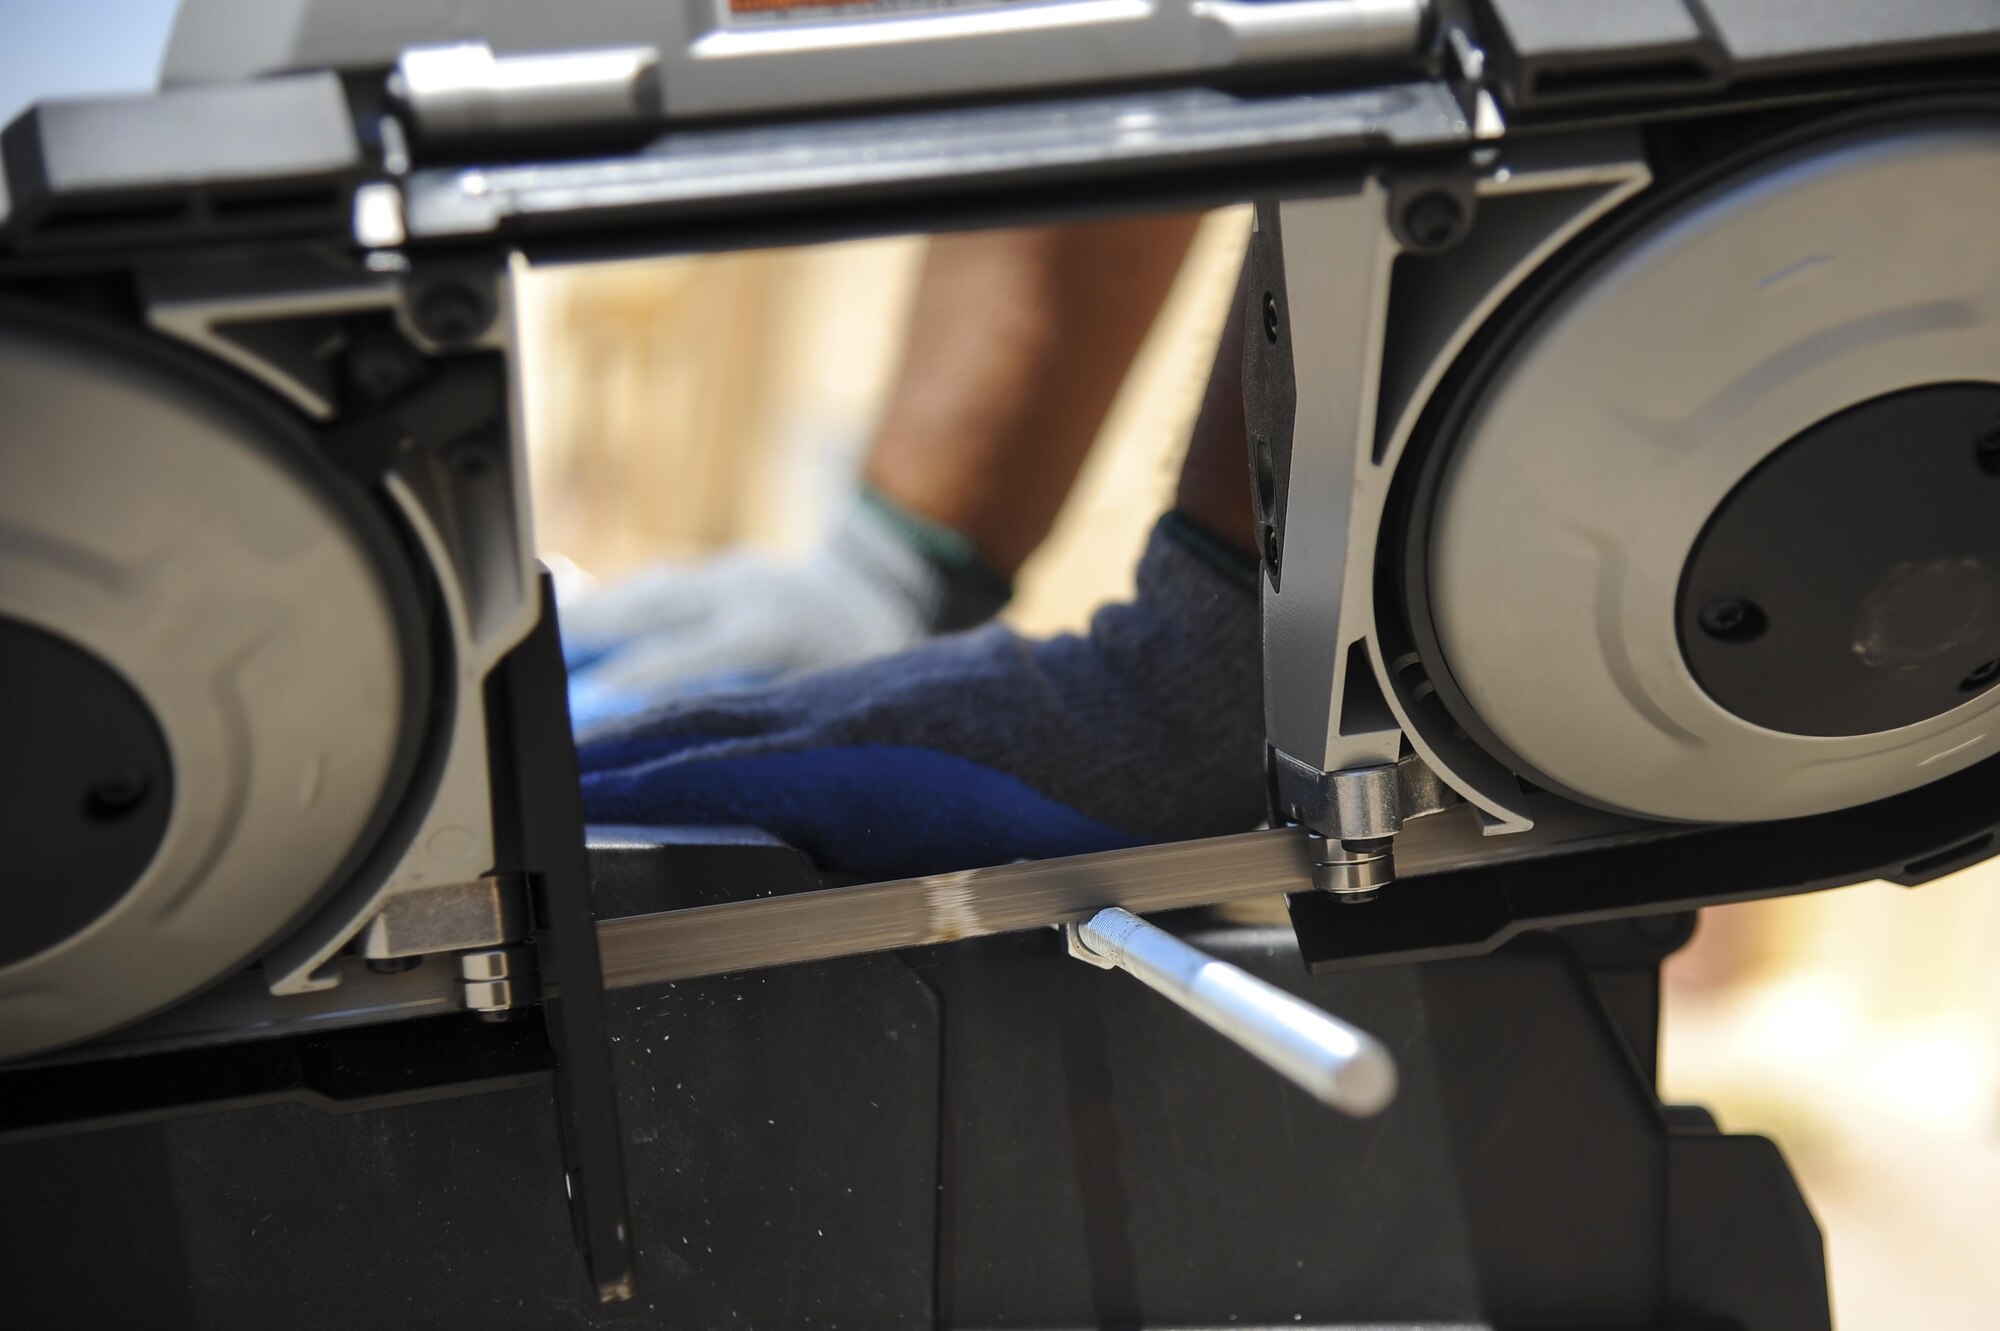 A fiber technician from Consolidated Networks, uses a band saw to cut an all thread for a communications cabinet installation at the 309th Aircraft Maintenance and Regeneration Group at Davis-Monthan Air Force Base, Ariz., May 24, 2017. The contractors and 355th Communications Squadron Airmen have been in the process of creating and executing a modification plan, upgrading D-M’s network without interfering with any of the Desert Lightning Team’s connectivity.  (U.S. Air Force photo by Senior Airman Mya M. Crosby)